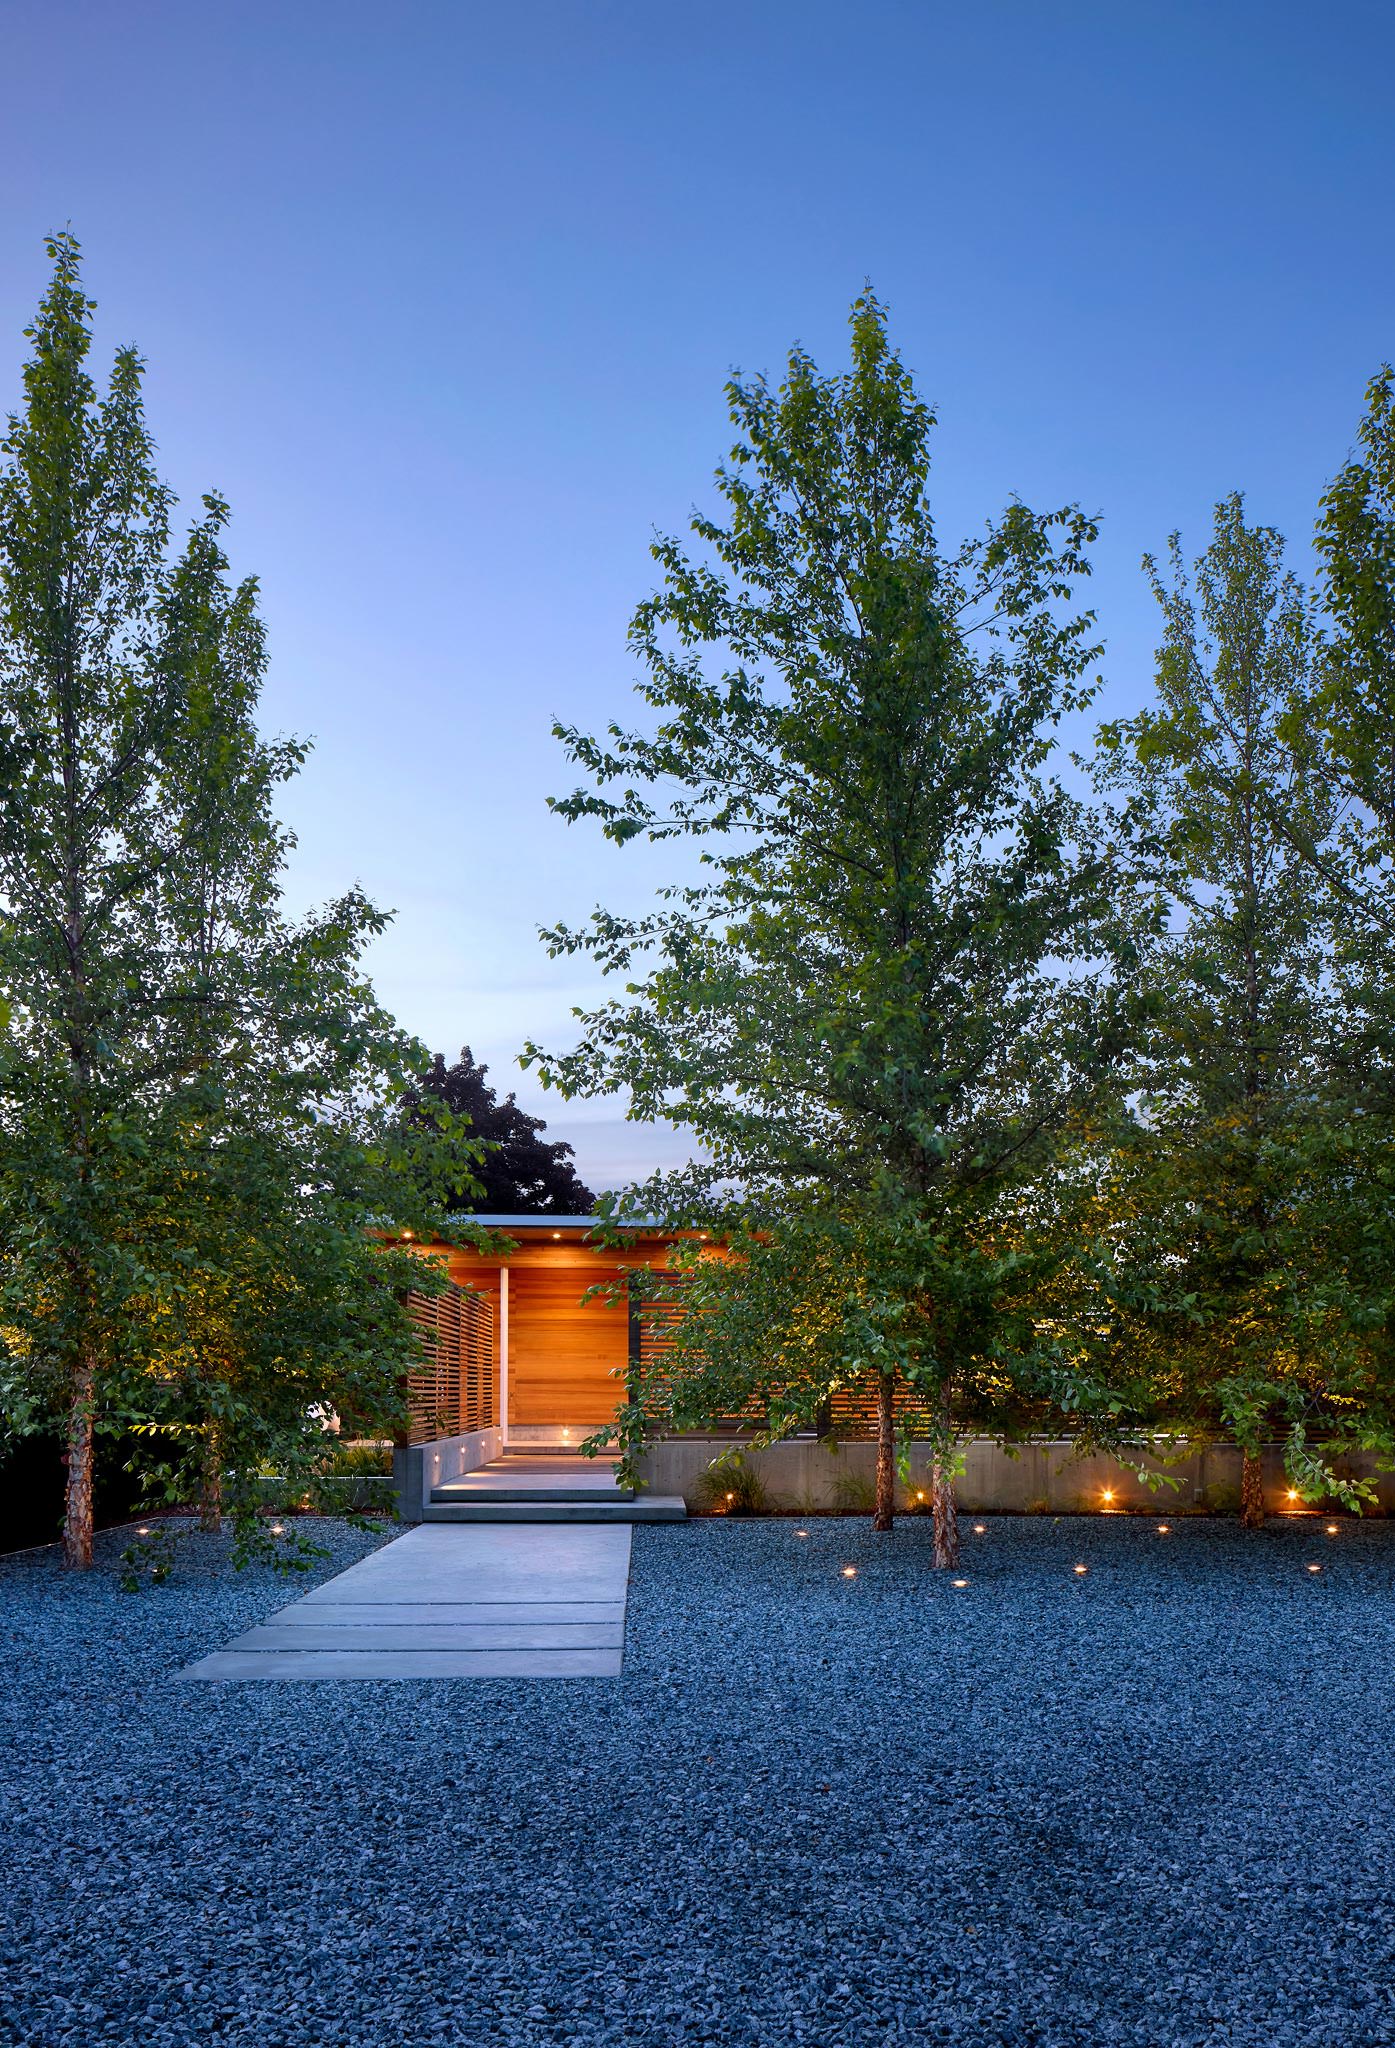 Dusk view of entry to modern residence featuring wood finishes surrounding trees and gravel driveway